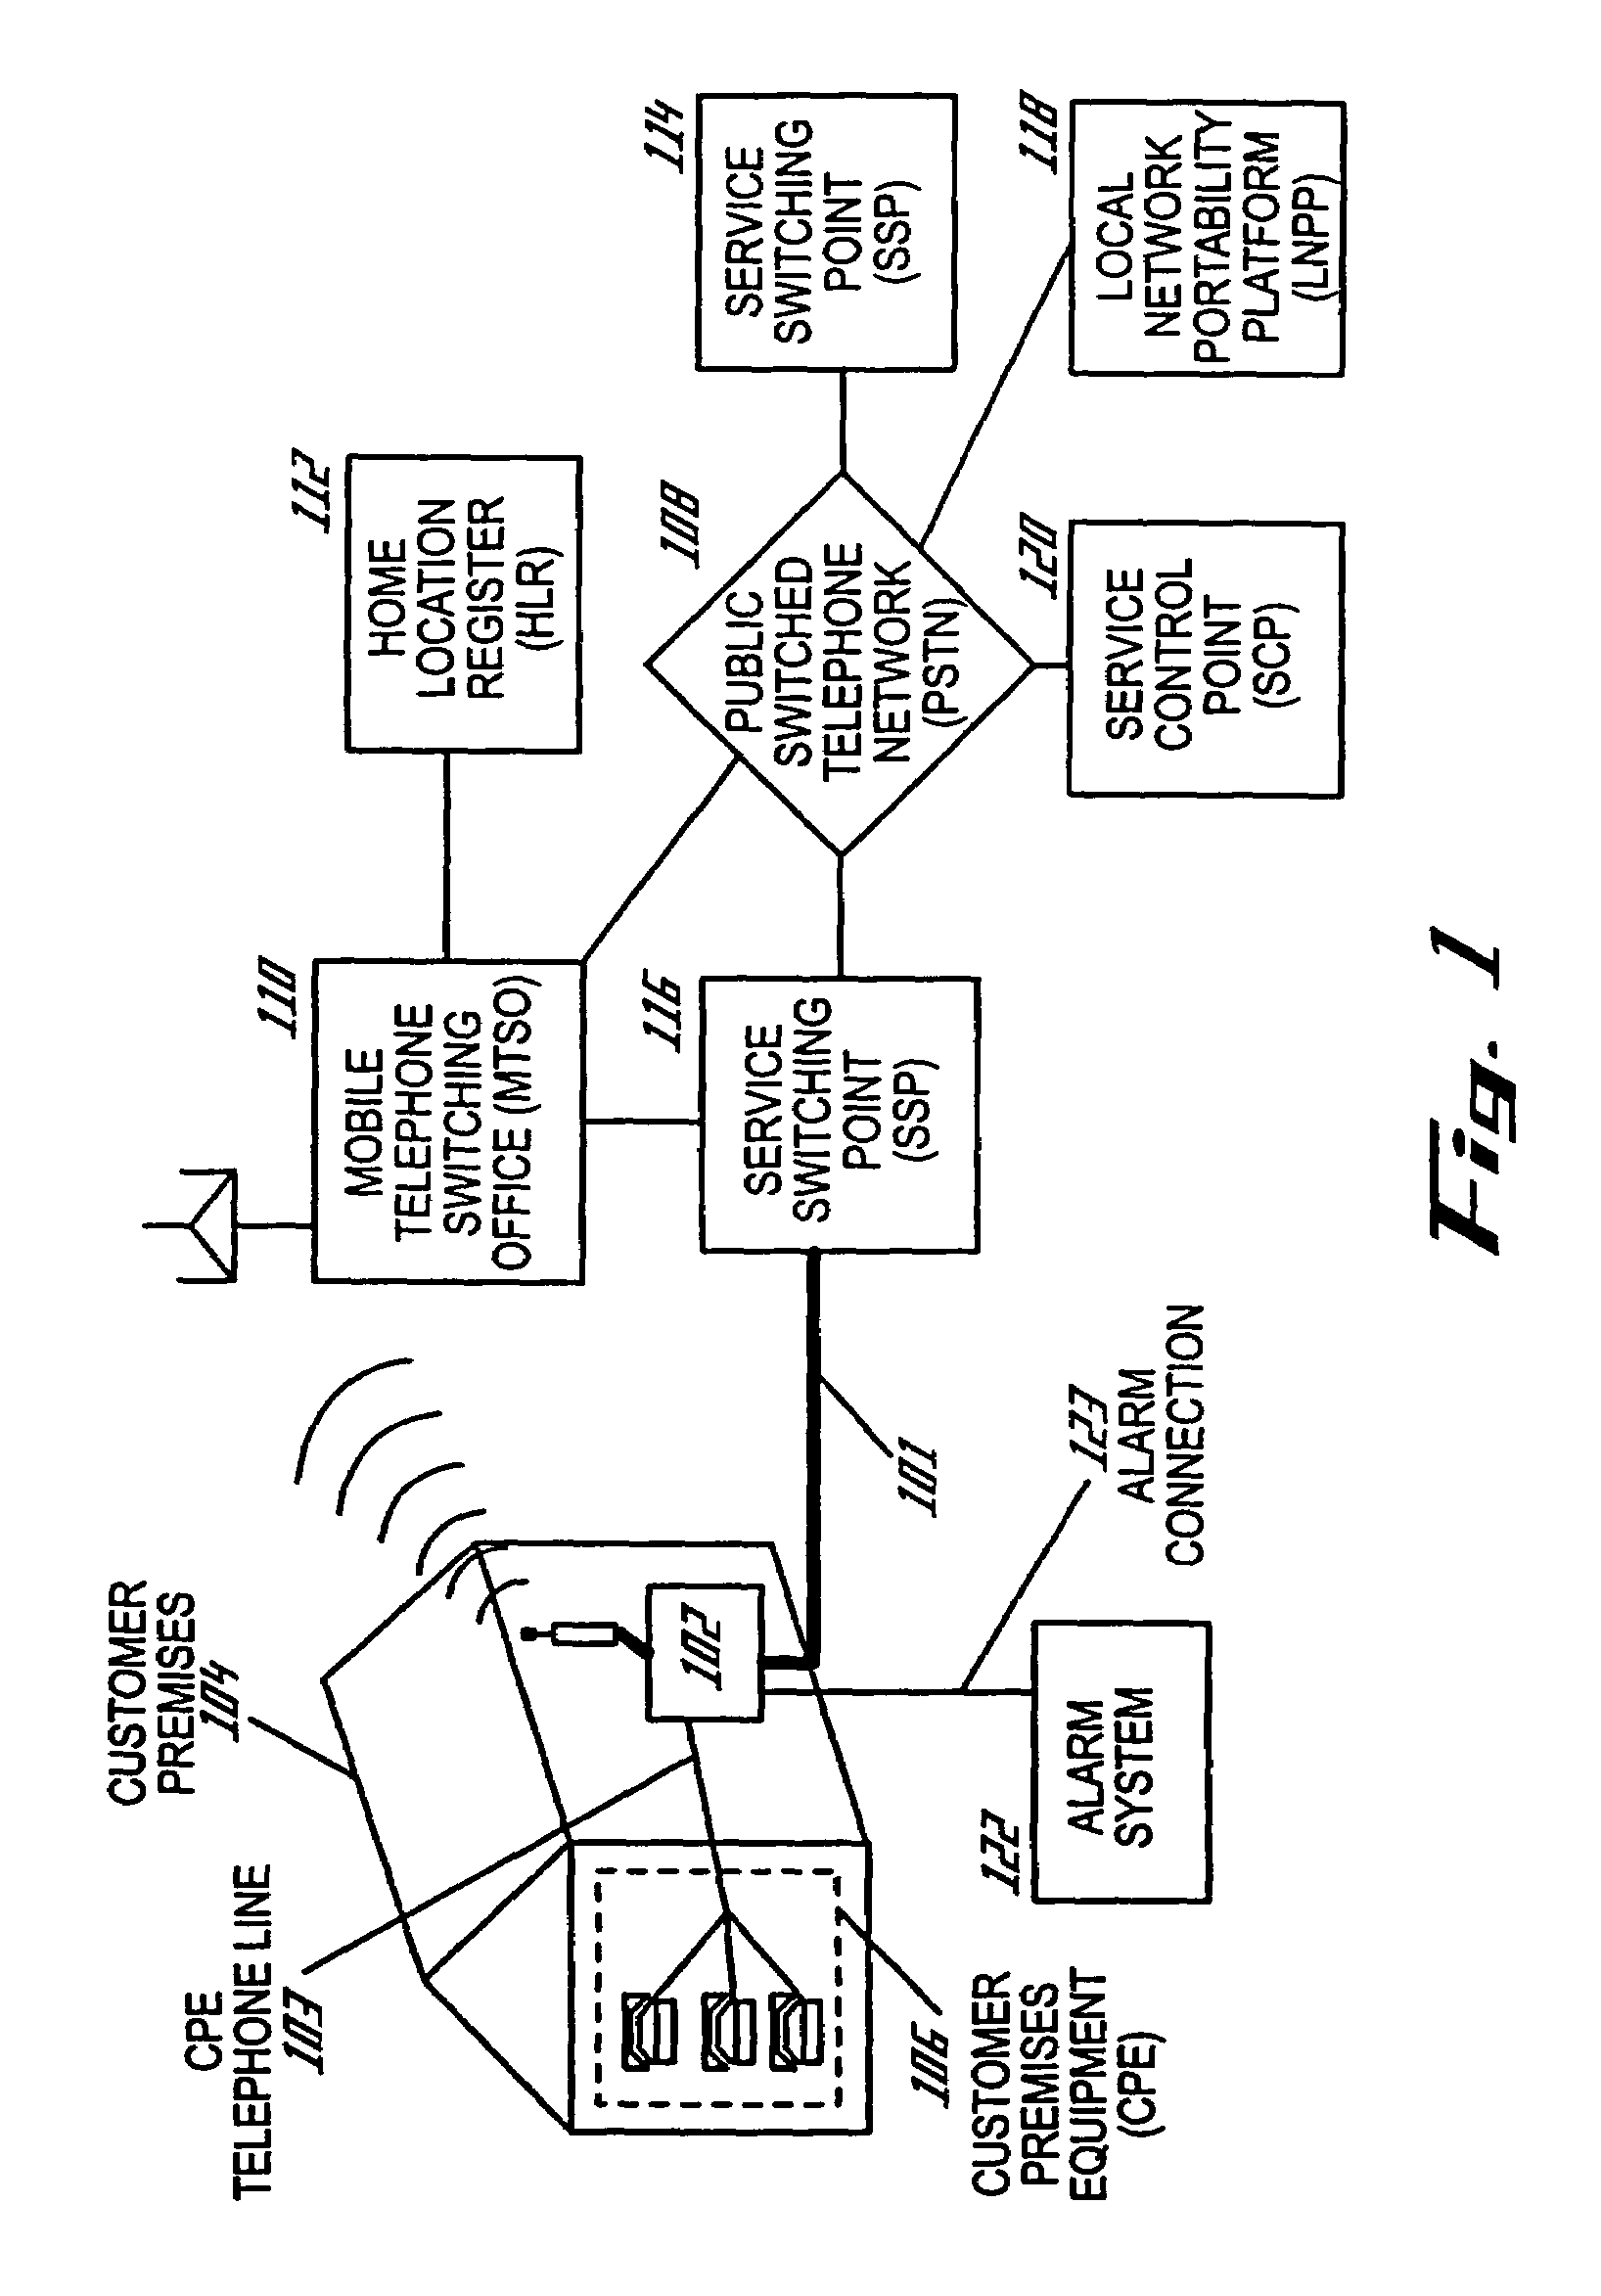 Wireless backup telephone device and associated support system